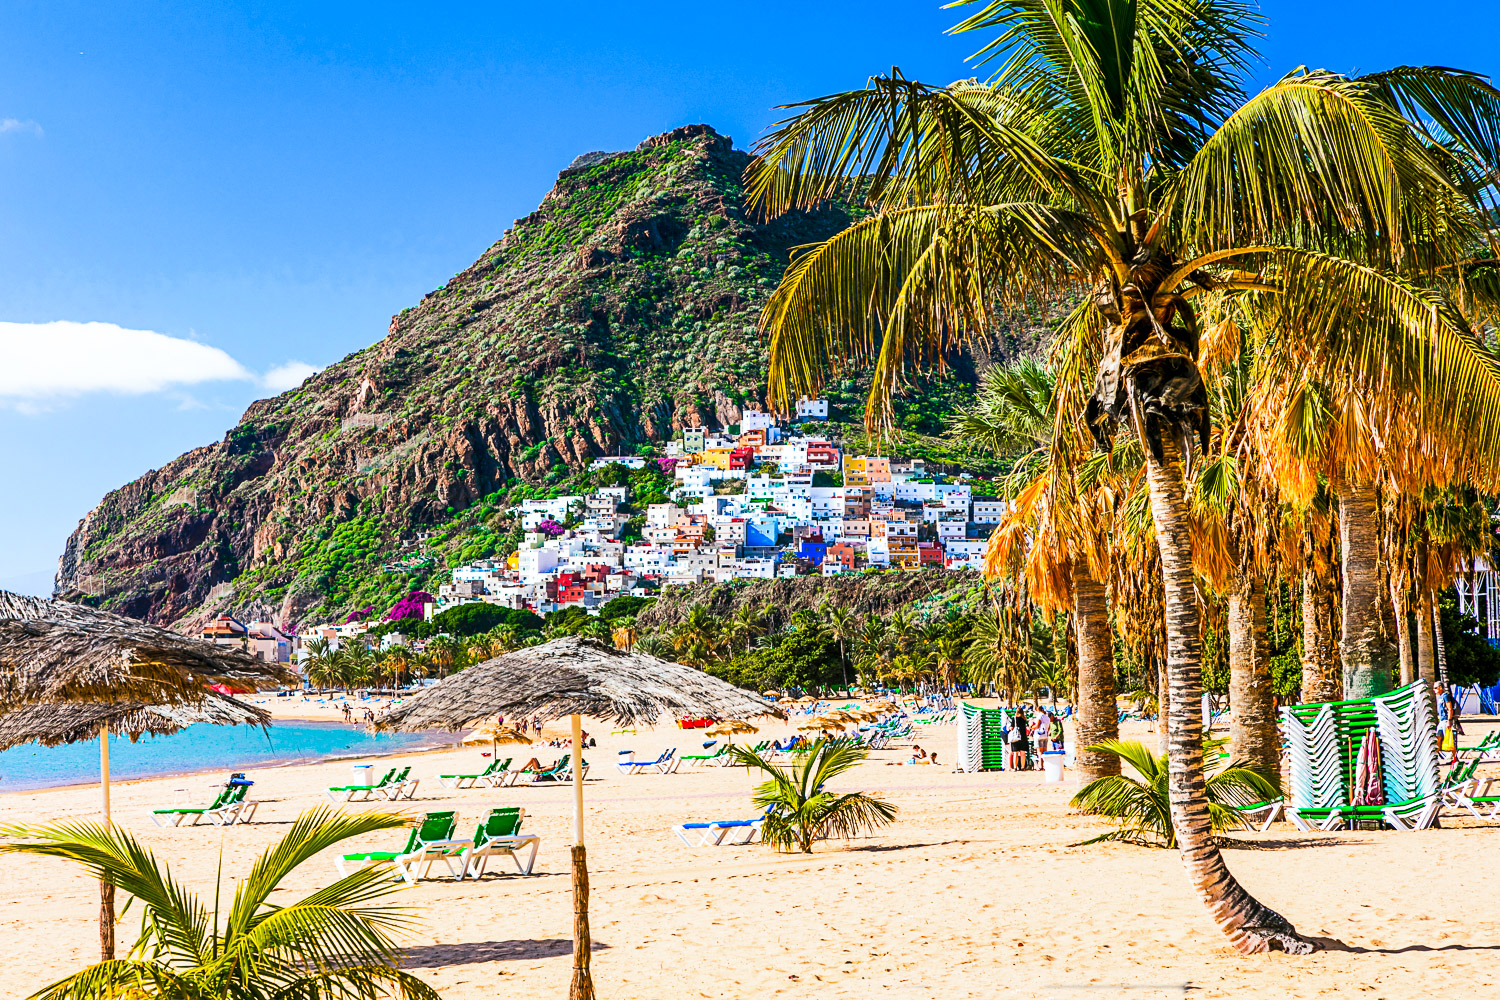 View of Las Teresitas beach near Santa Cruz with golden sand palm tree and colourful buildings in the shadow of a forested cliff - the Canary Islands are a great option for winter sun with kids